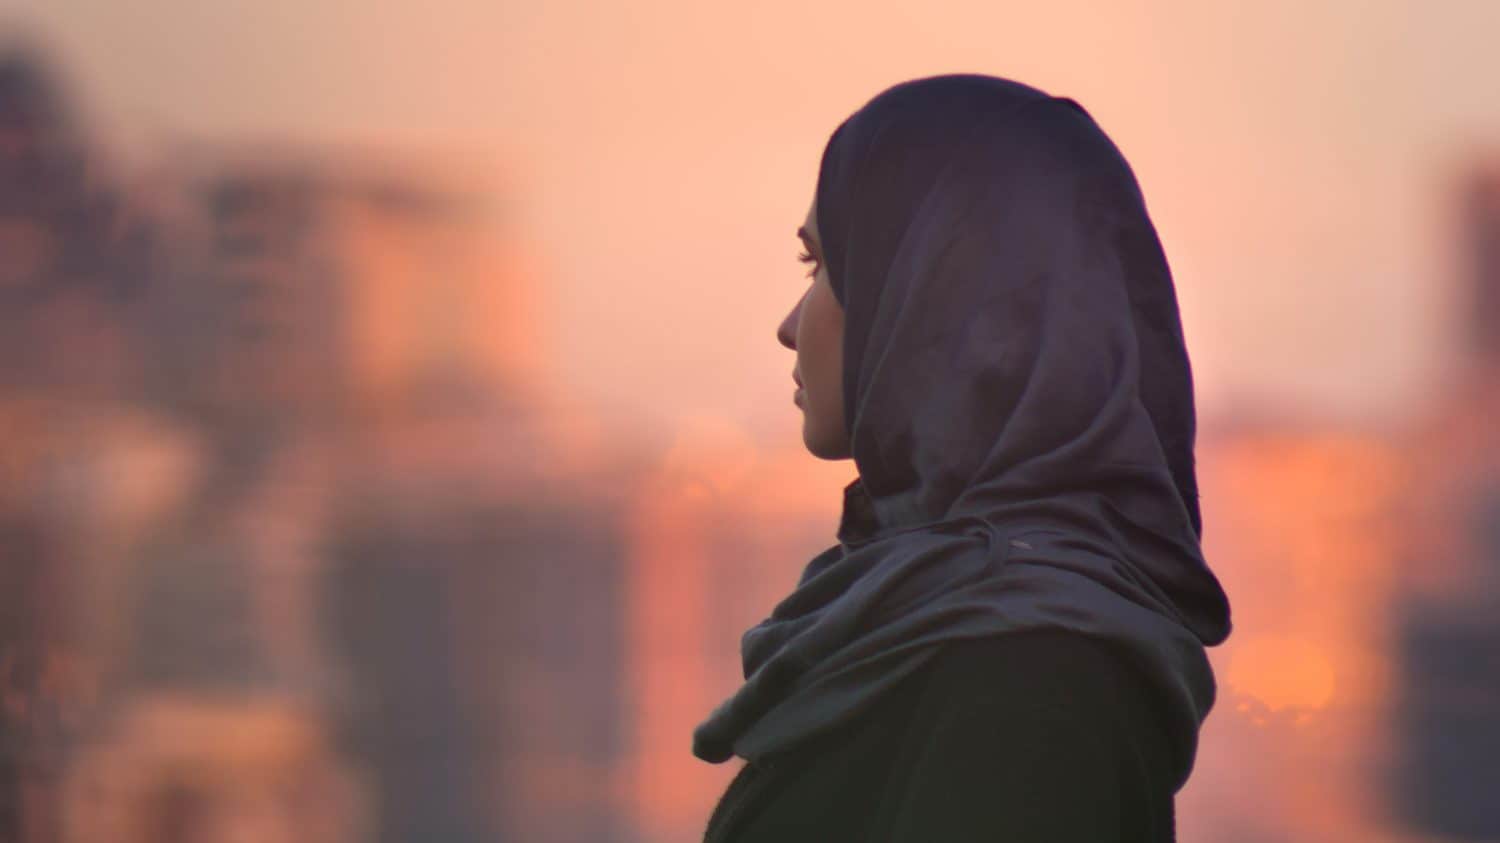 Closeup portrait of young pretty female in hijab looking forward with urban setting and shining buildings on the background